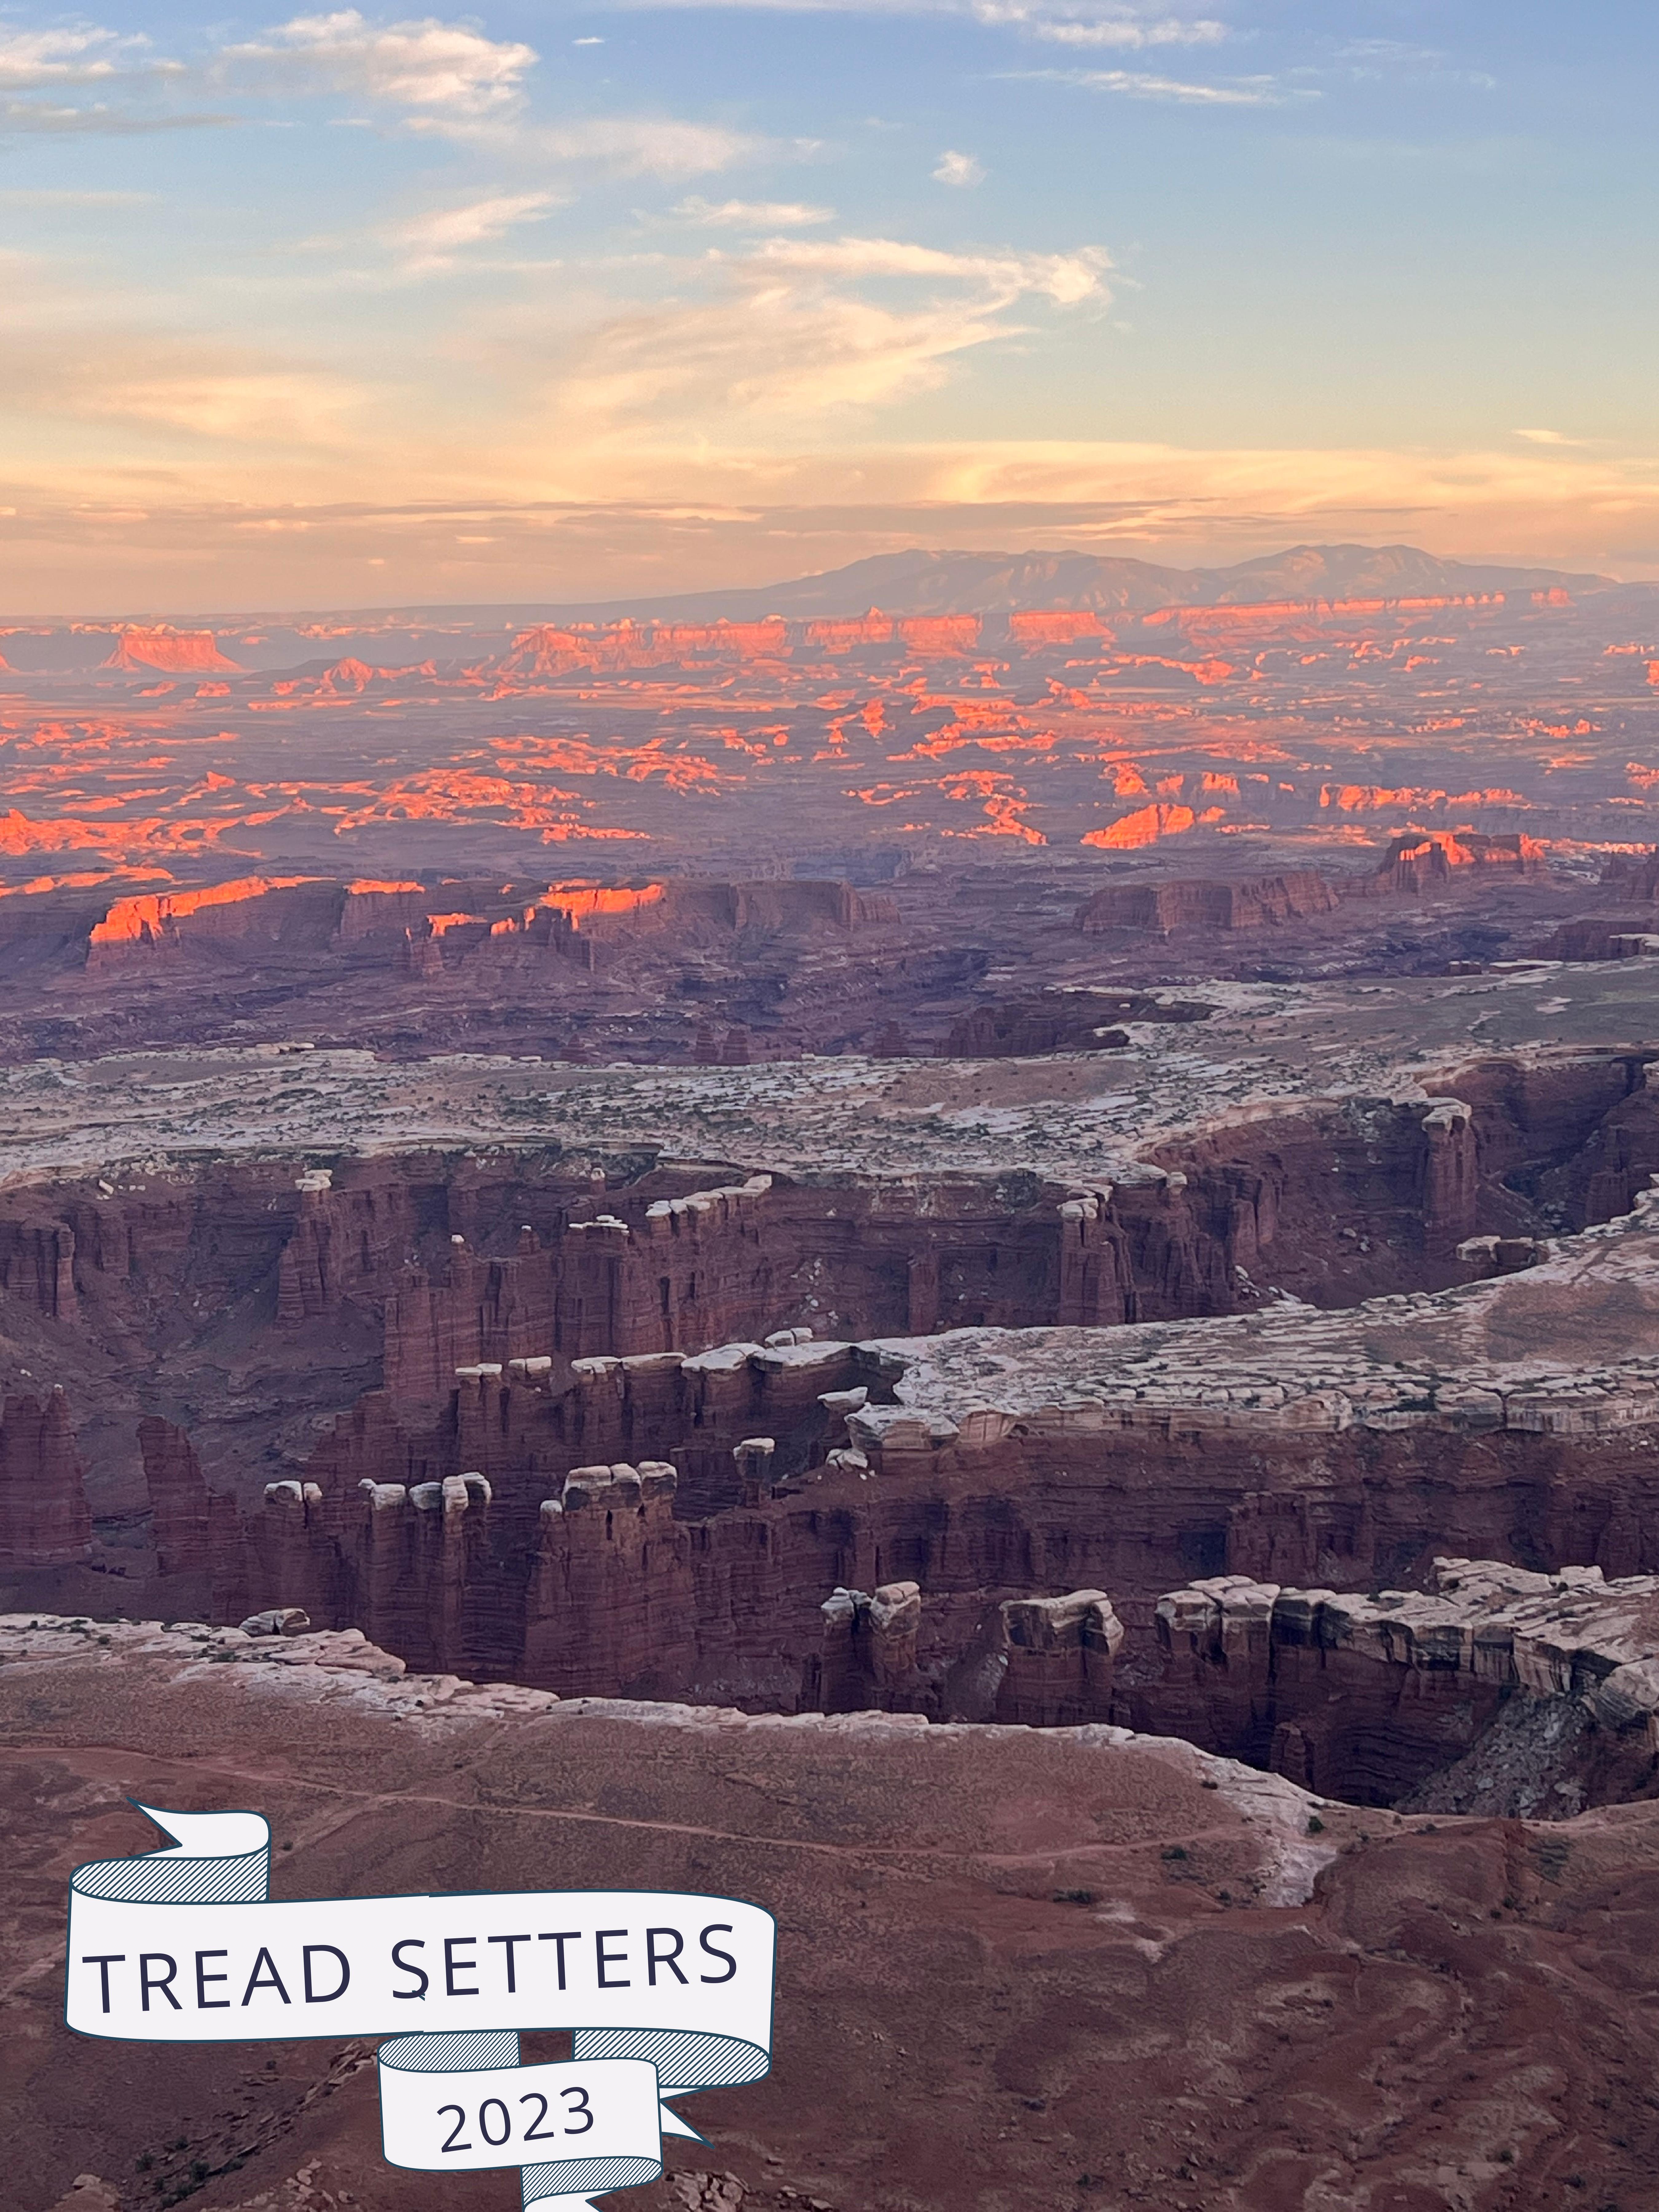 The sun lights up the depth of Canyonlands in the background while the canyons in the midground stand behind the shadow of a wall of canyons unseen. Upon scrutiny, there is a faint path, the White Rim Trail, that is relatively less impressive in the foreground, barely visible due to the details of the natural beauty in the background.  Credit: Dean Warren https://www.instagram.com/deanwarrenphotography/